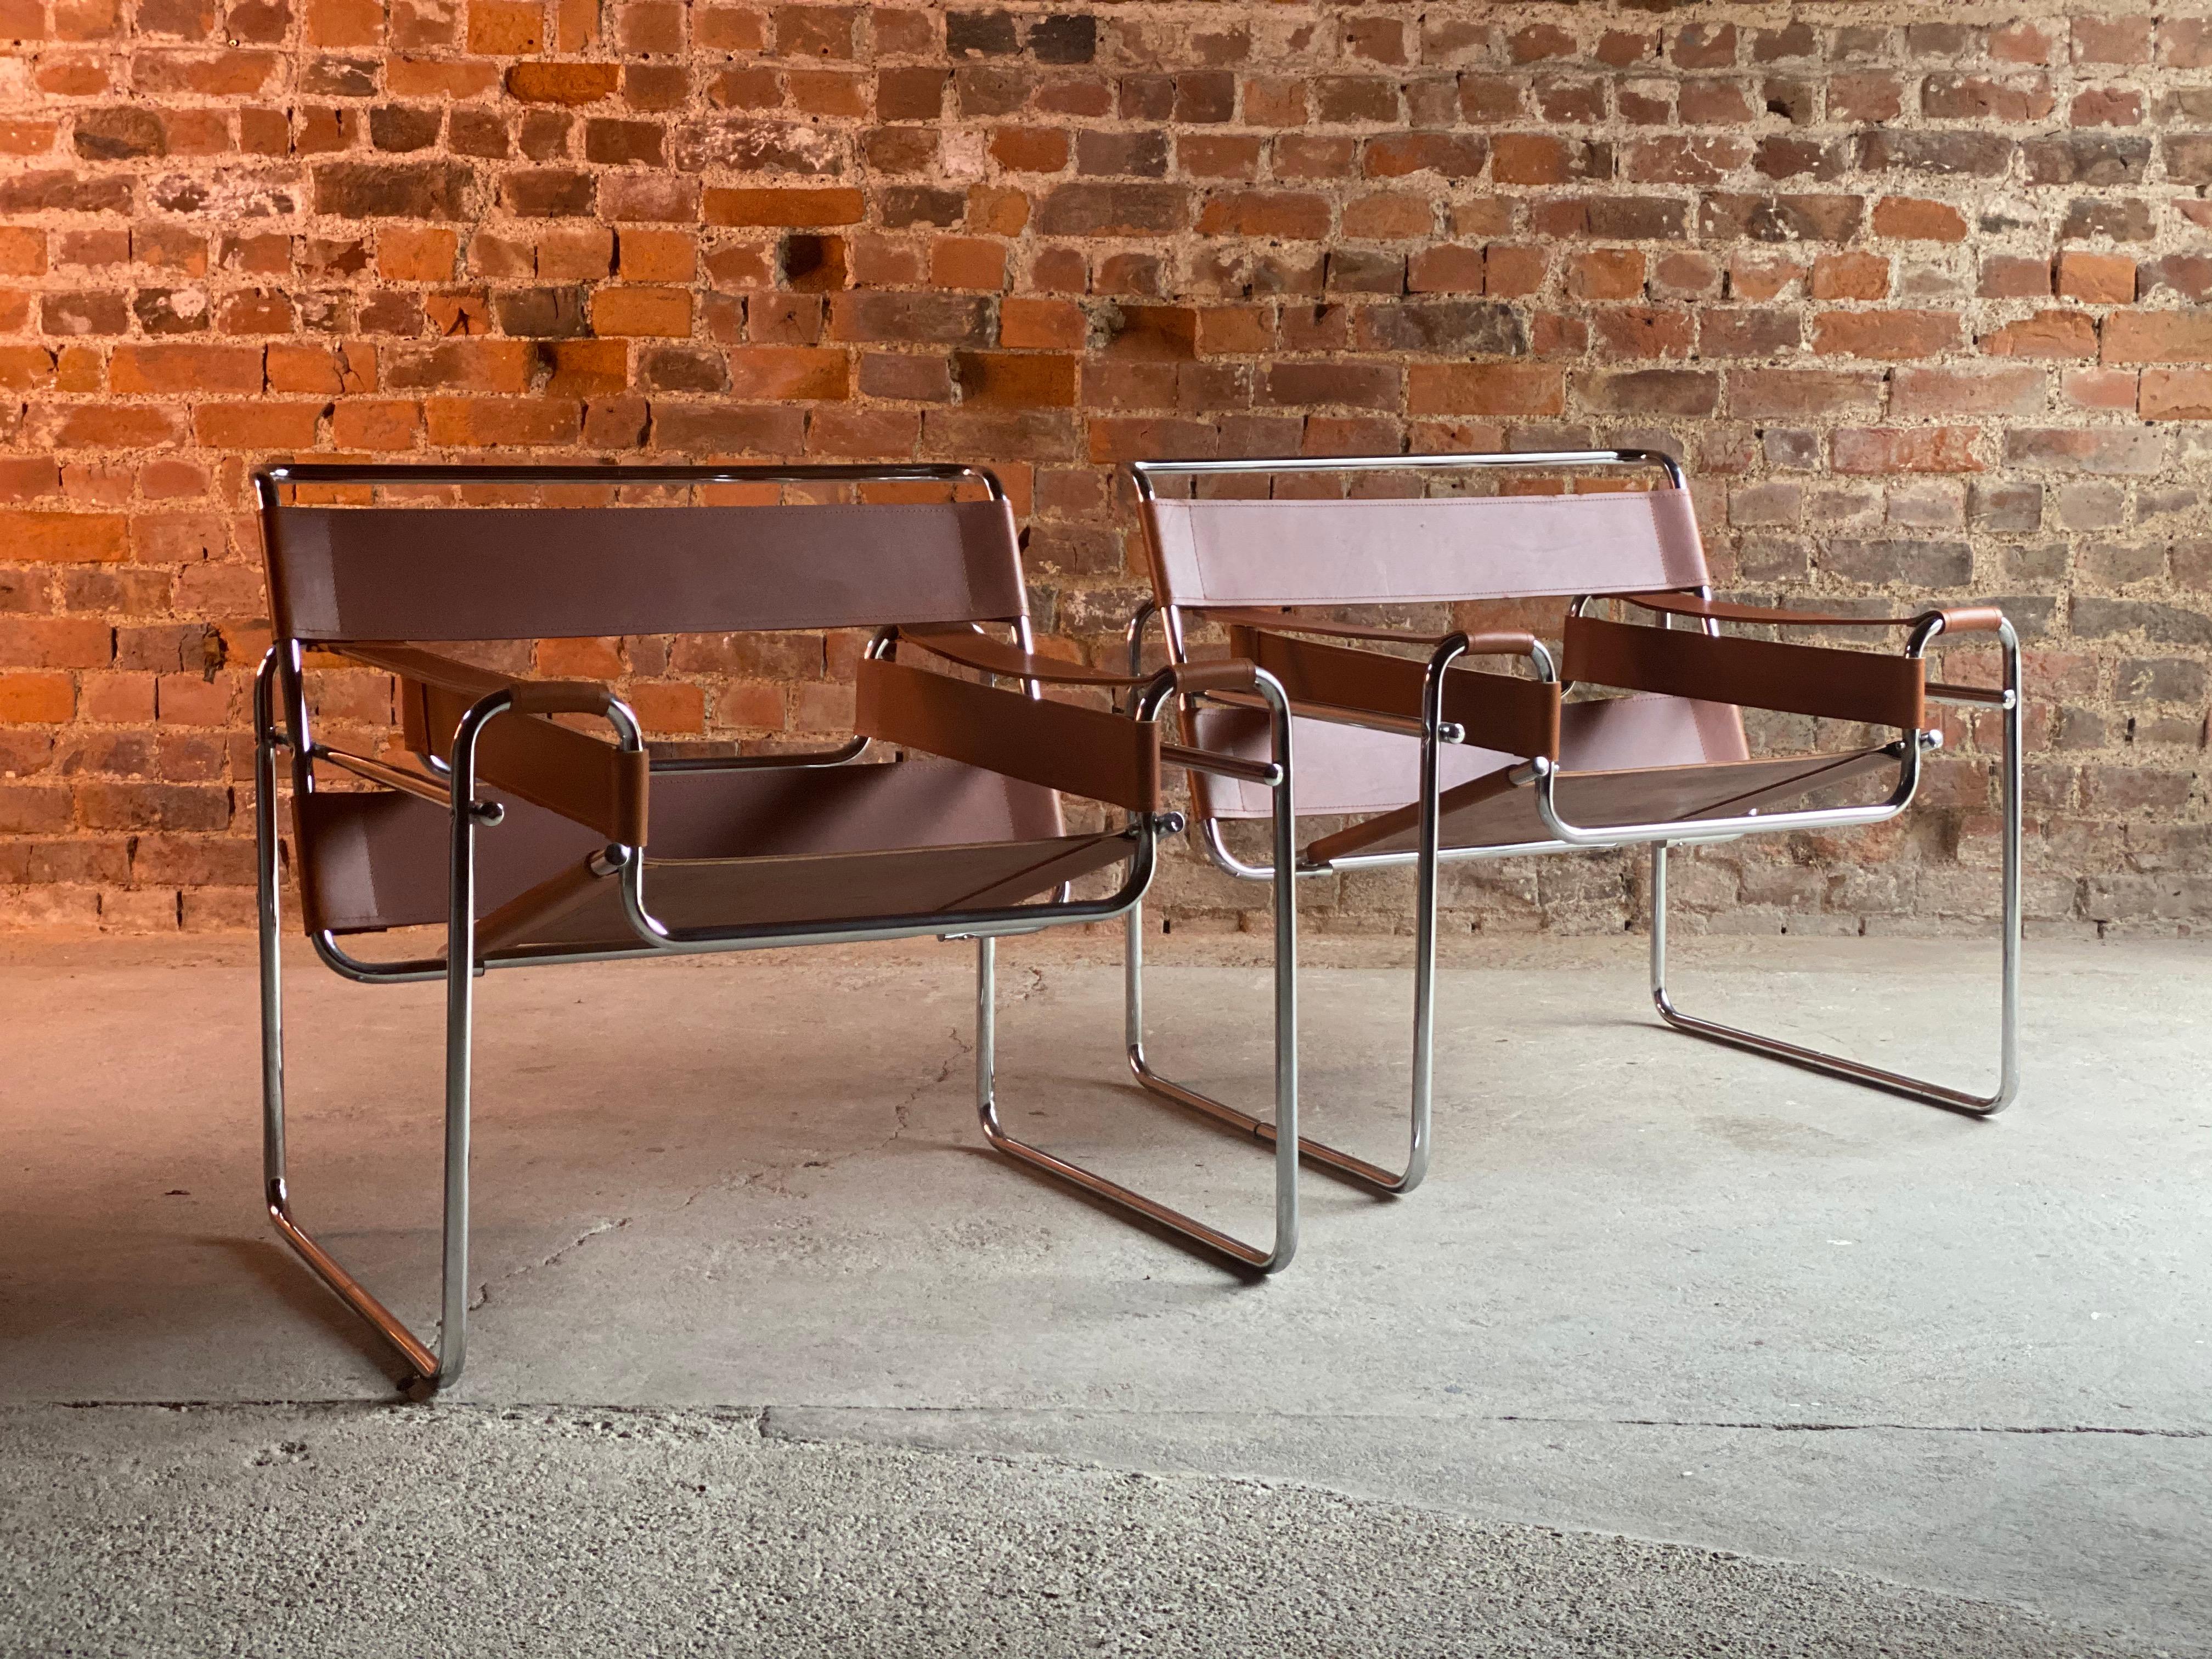 Mies van der Rohe design Wassily chairs, circa 2000

Magnificent pair of Mies van der Rohe inspired Wassily chairs, circa 2000, the chairs with tan saddle leather strapping on a chrome base. Inspired by the frame of a bicycle and influenced by the